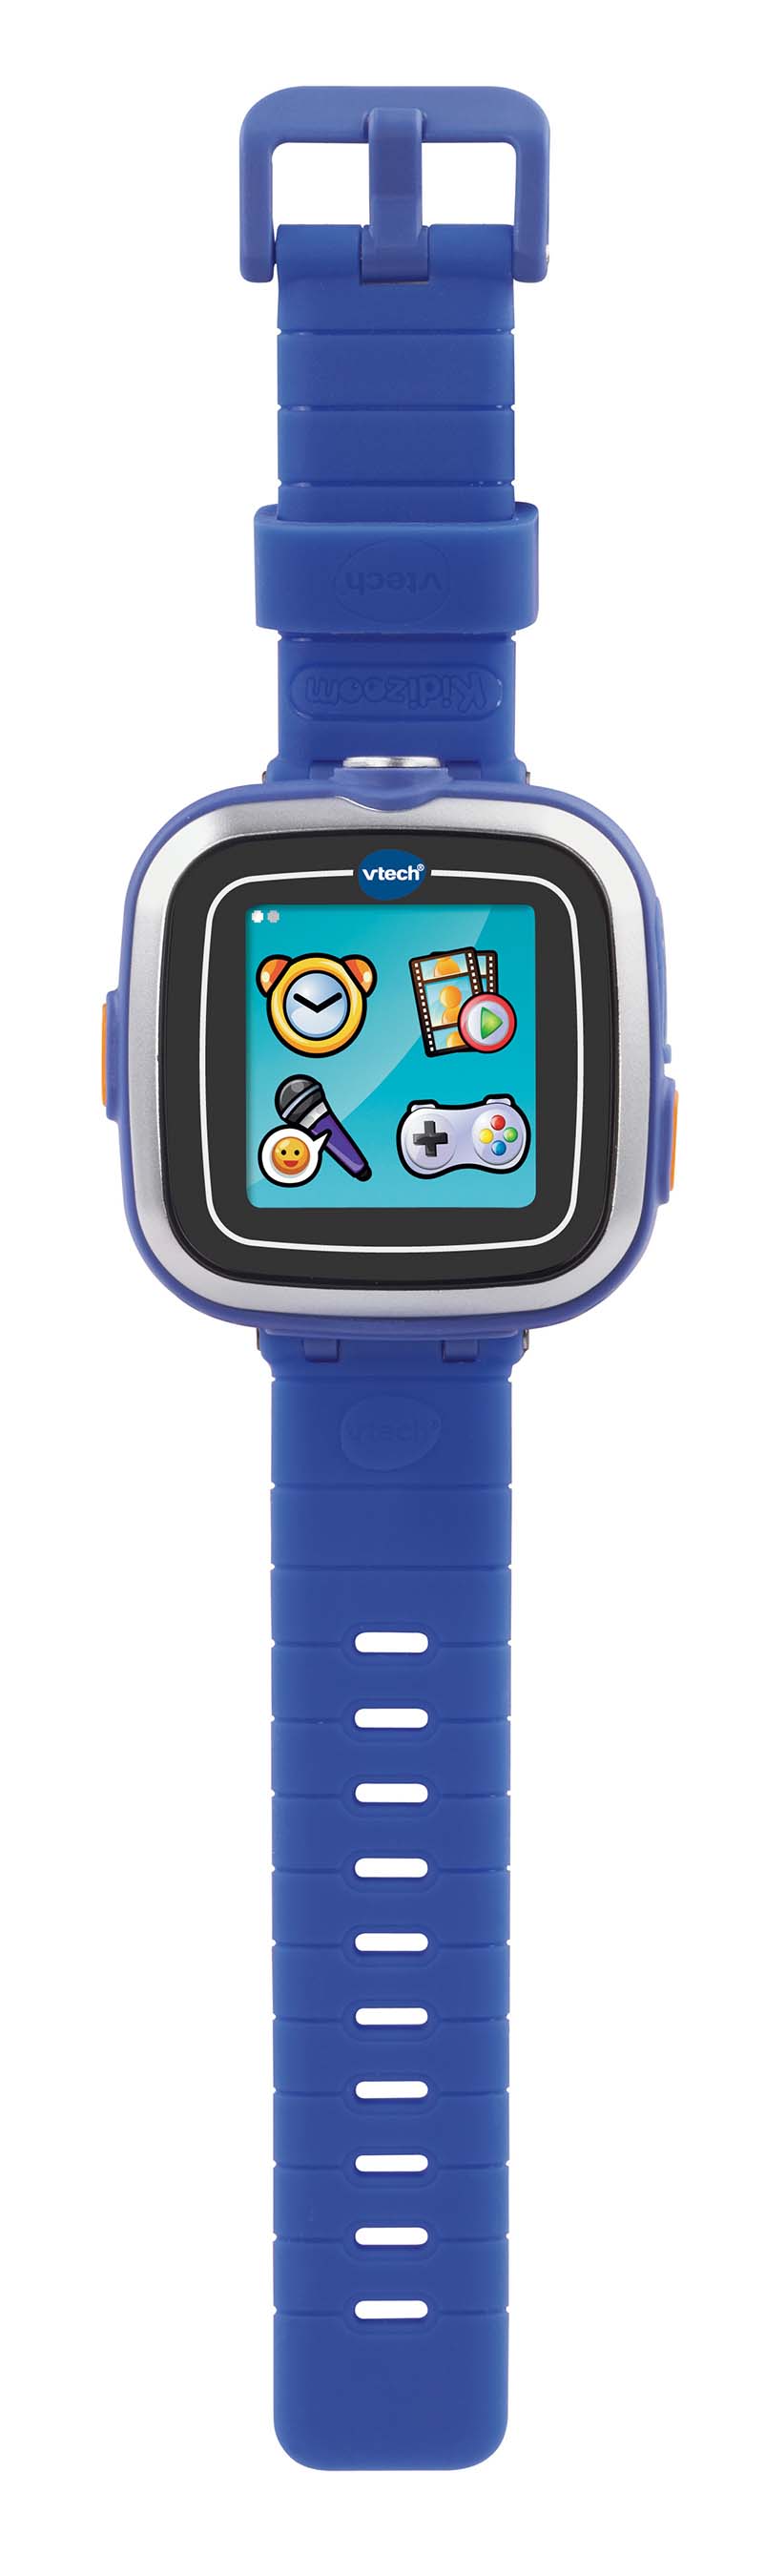 VTech(R) introduces new Kidizoom(R) Smartwatch - the smartest watch for kids